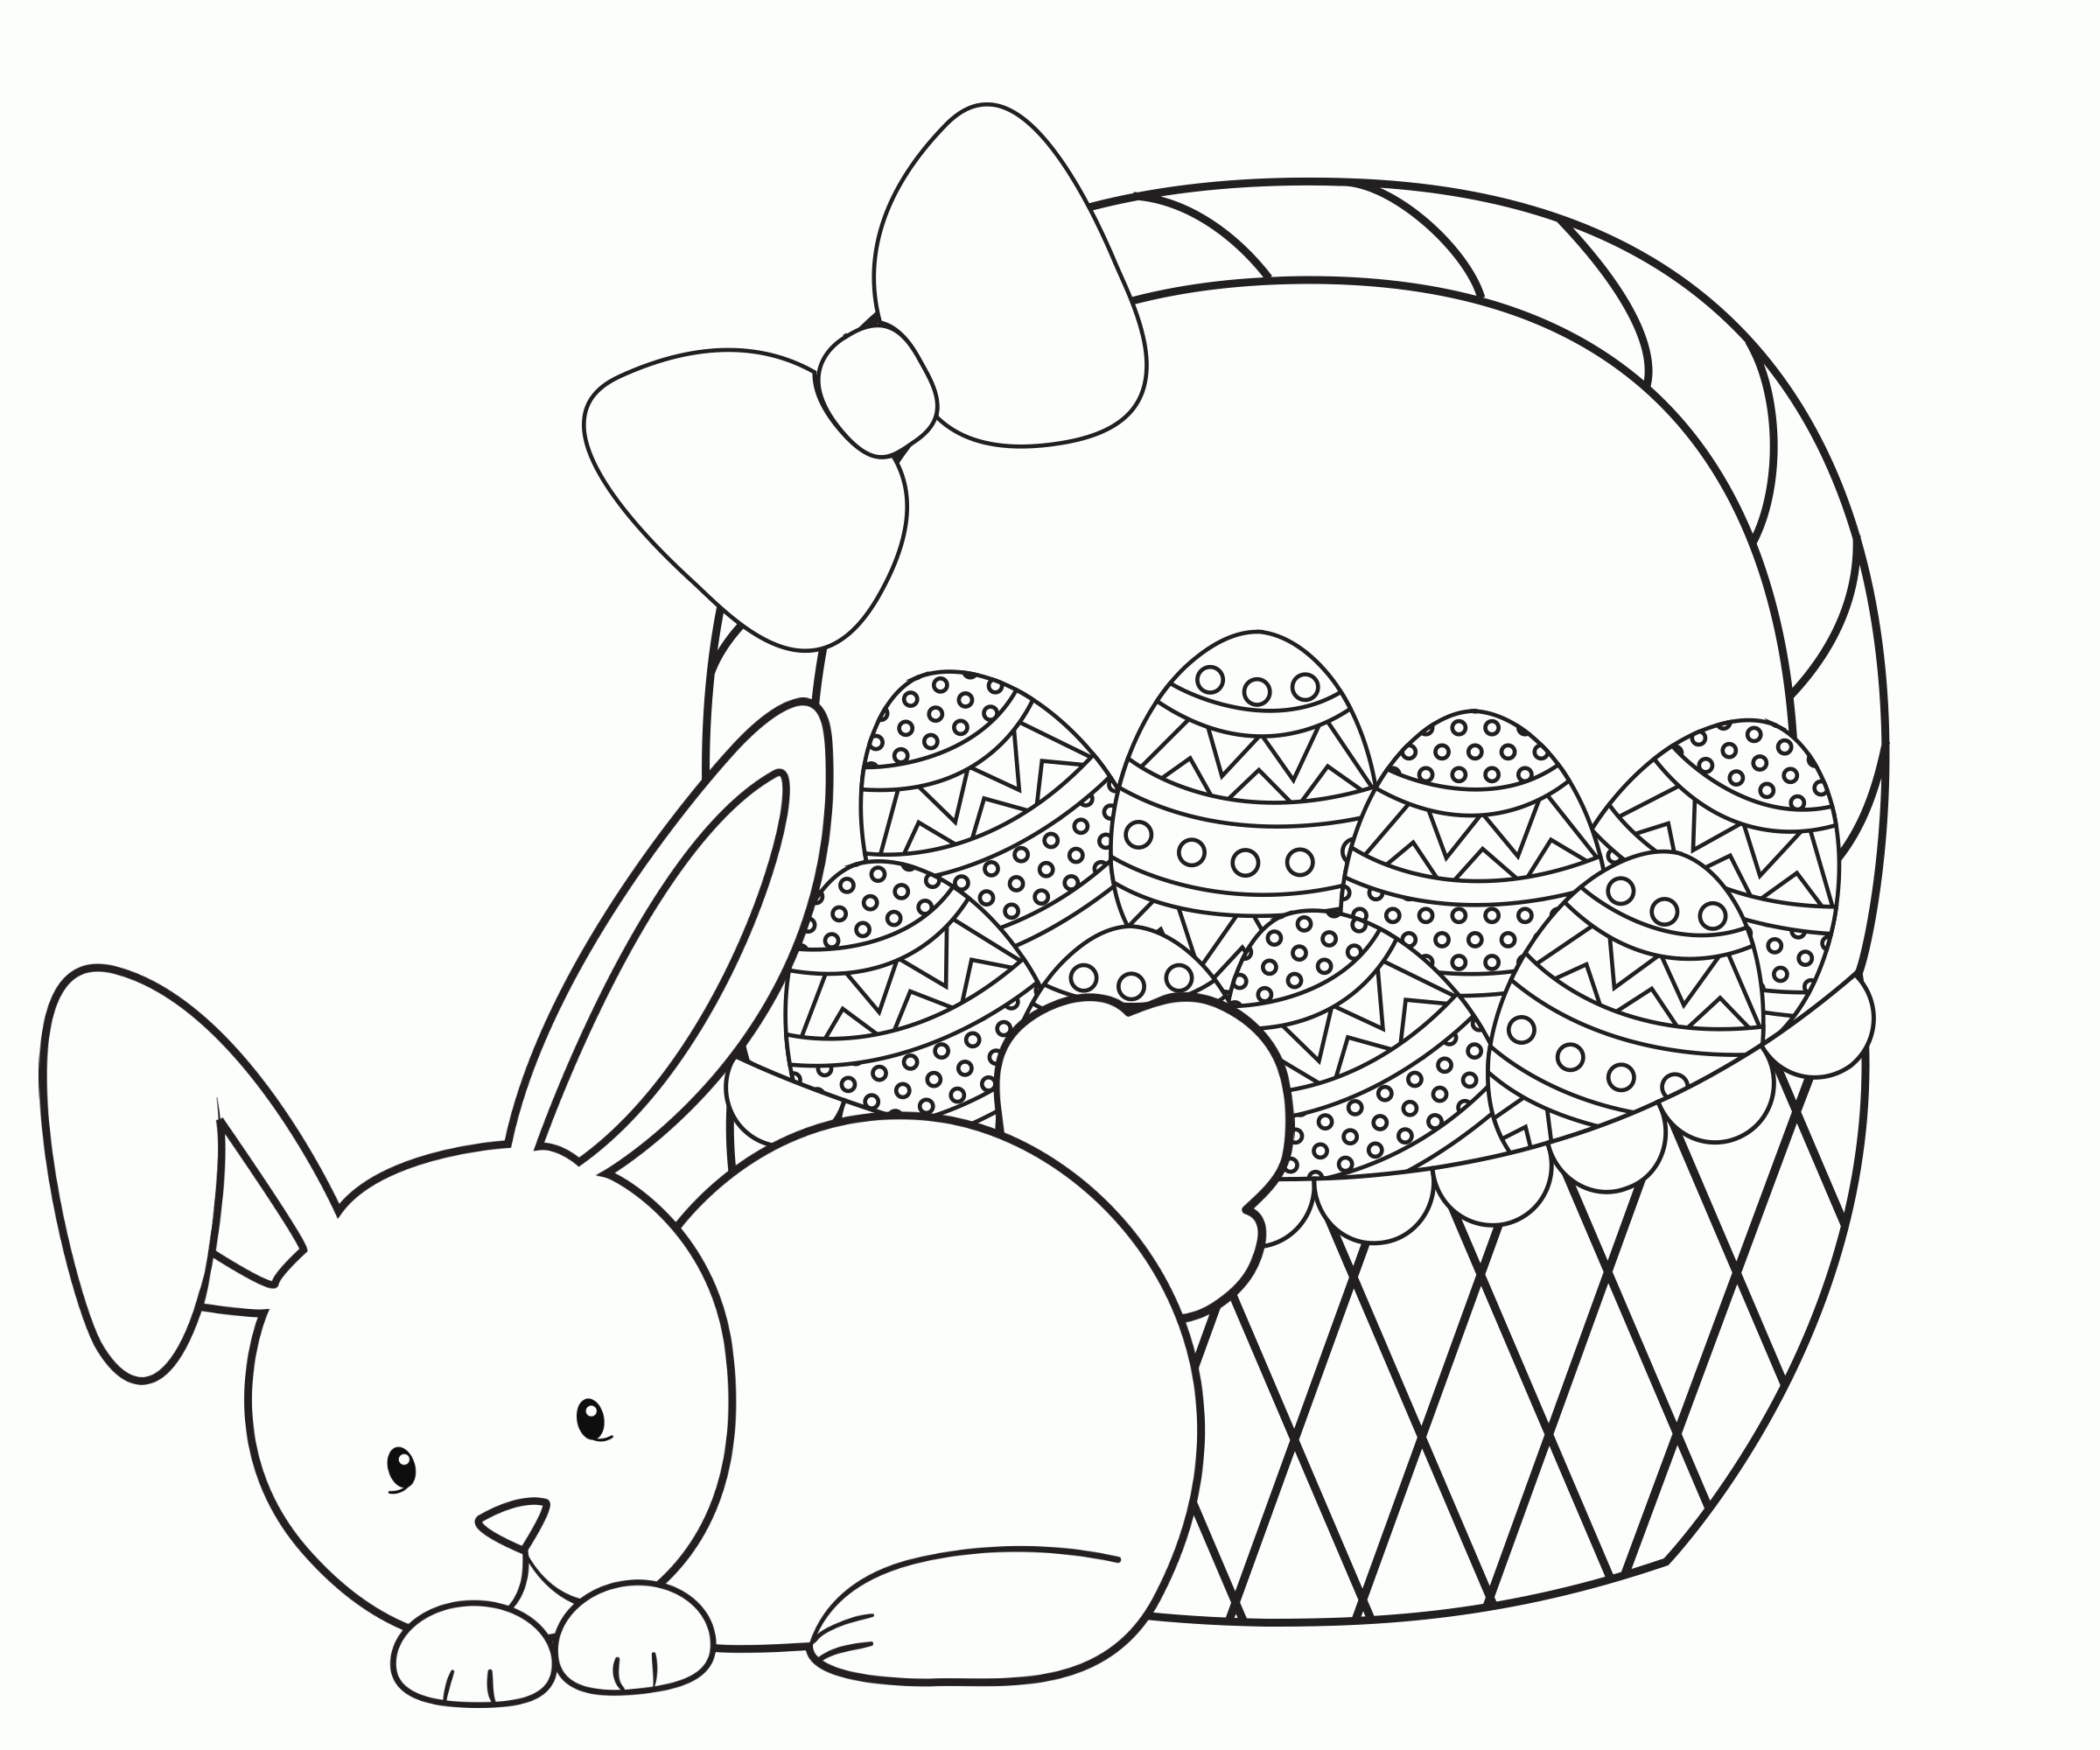 Empty Easter Basket Coloring Page - Coloring Home